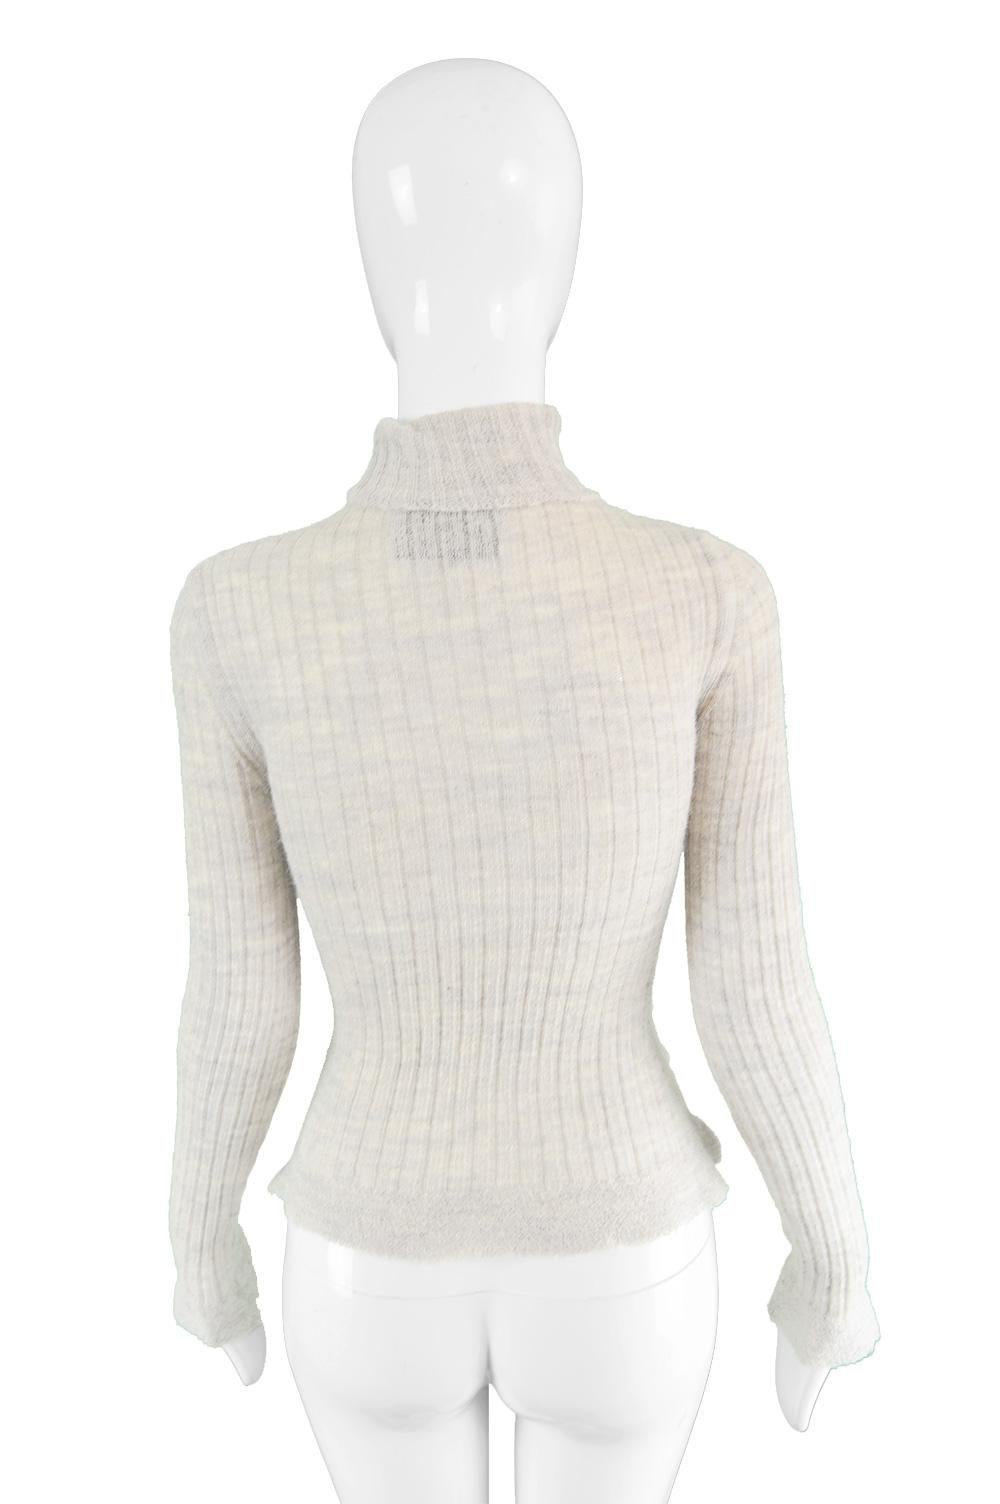 Jean Paul Gaultier Vintage Fine Knit Military Braid Cut Out Sweater, 1990s For Sale 2